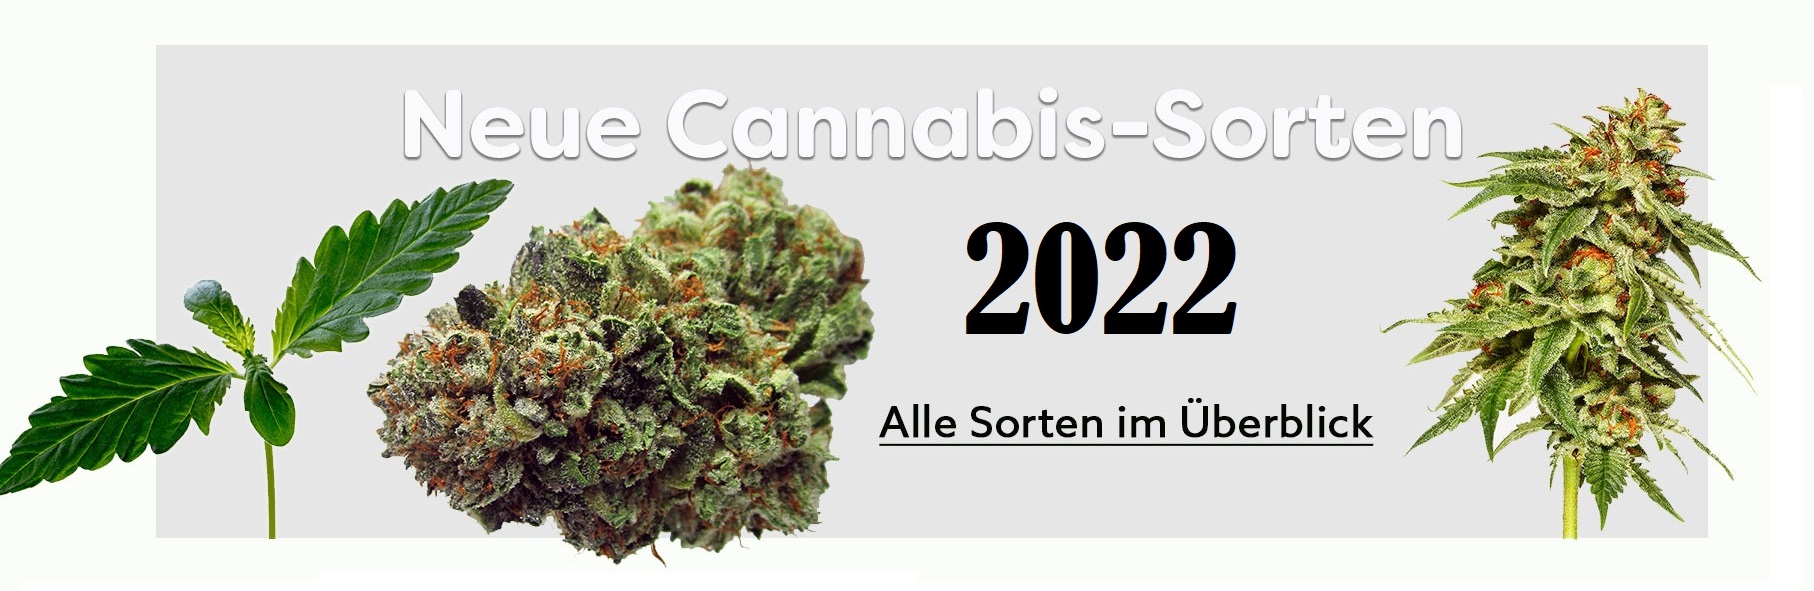 Neues Weed